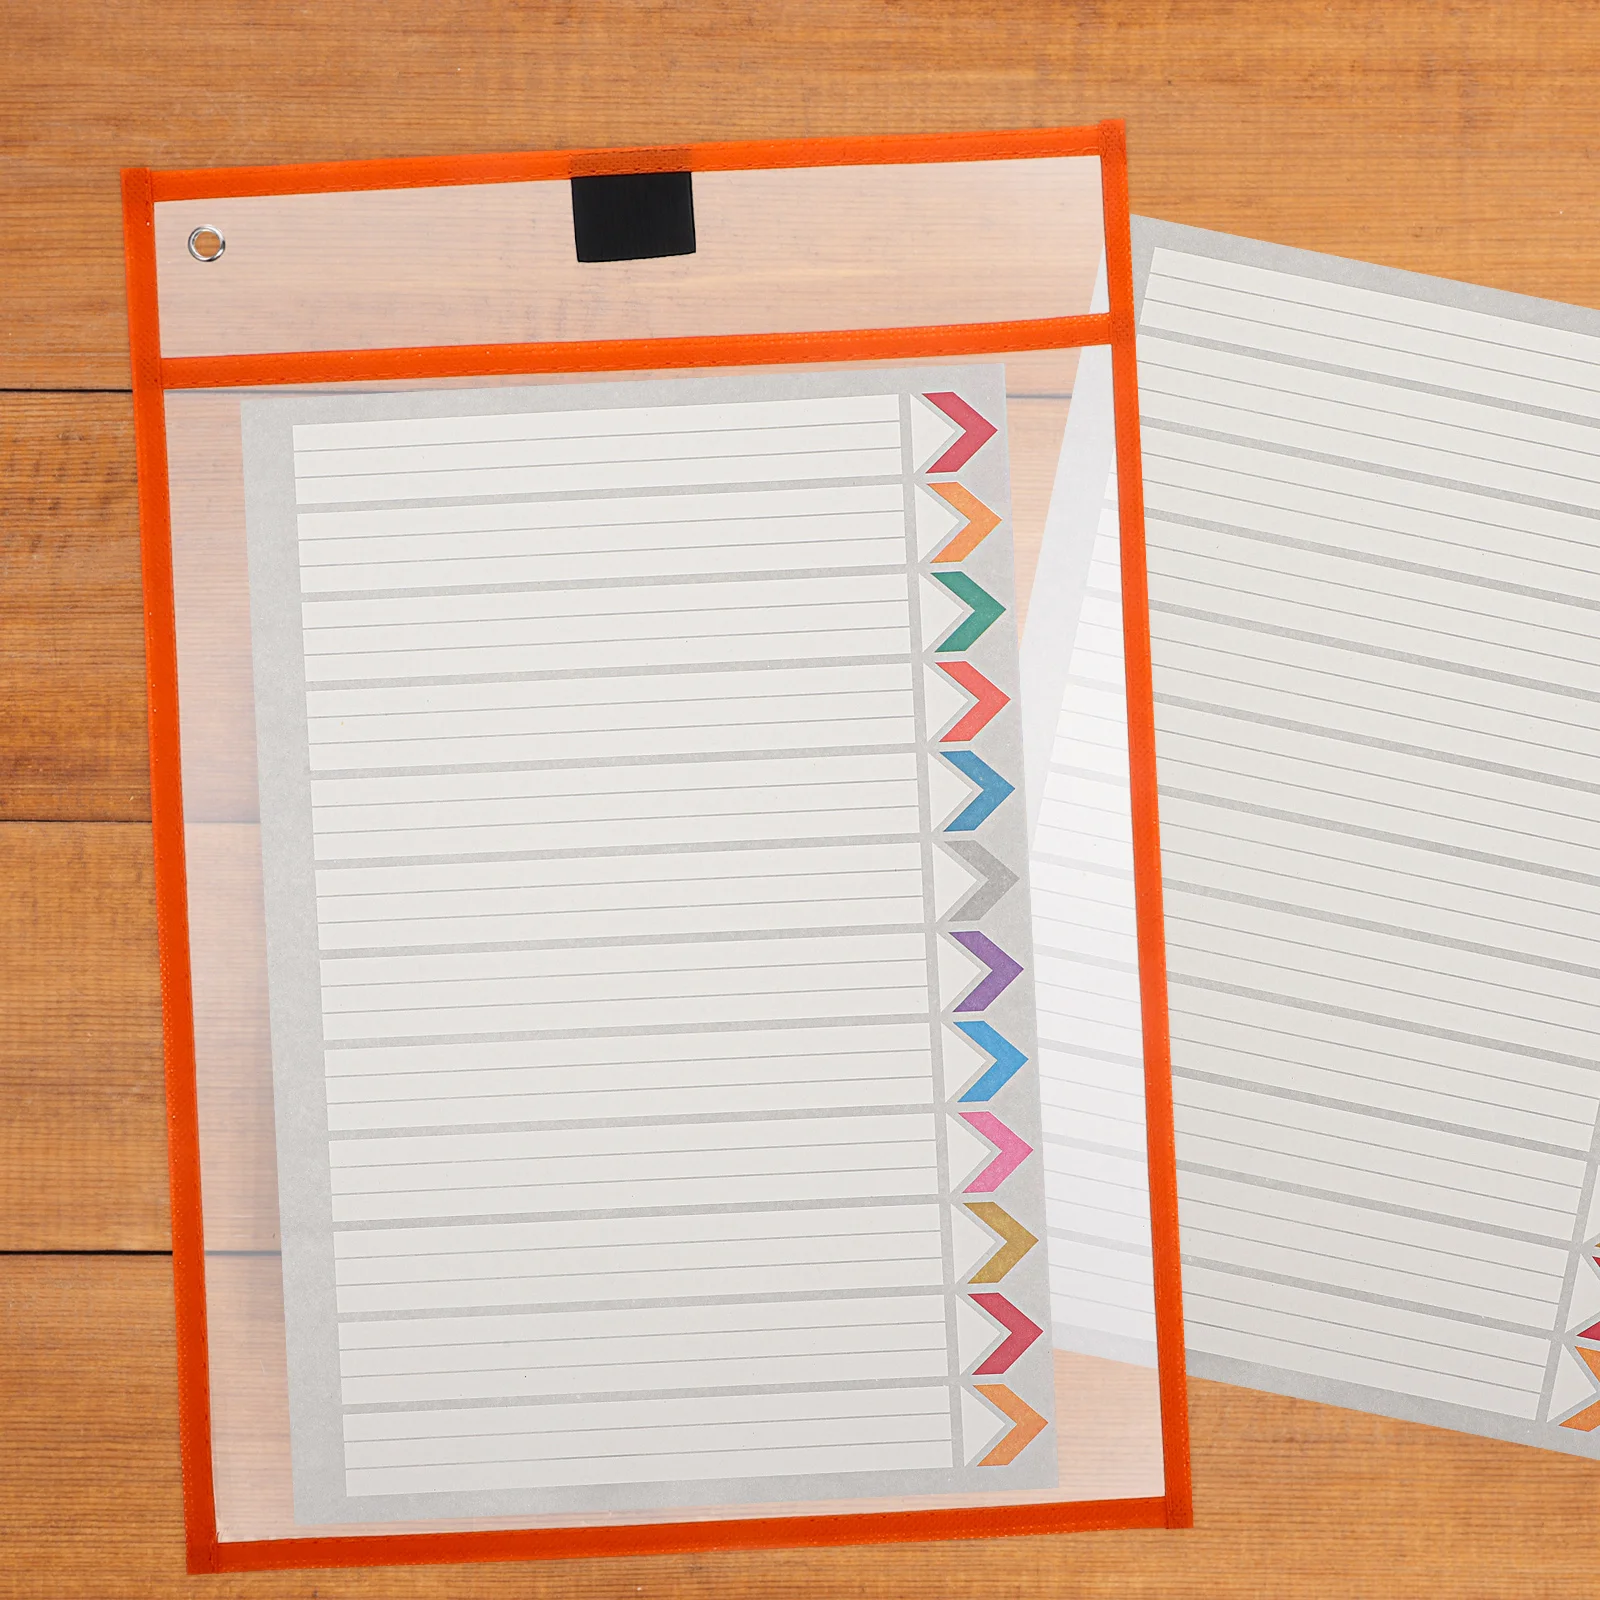 

Orange Bed Sheetss Clear Reusable Sleeves Dry Erase Sheets Clear Folder Sleeves File Folder Teaching for Classroom